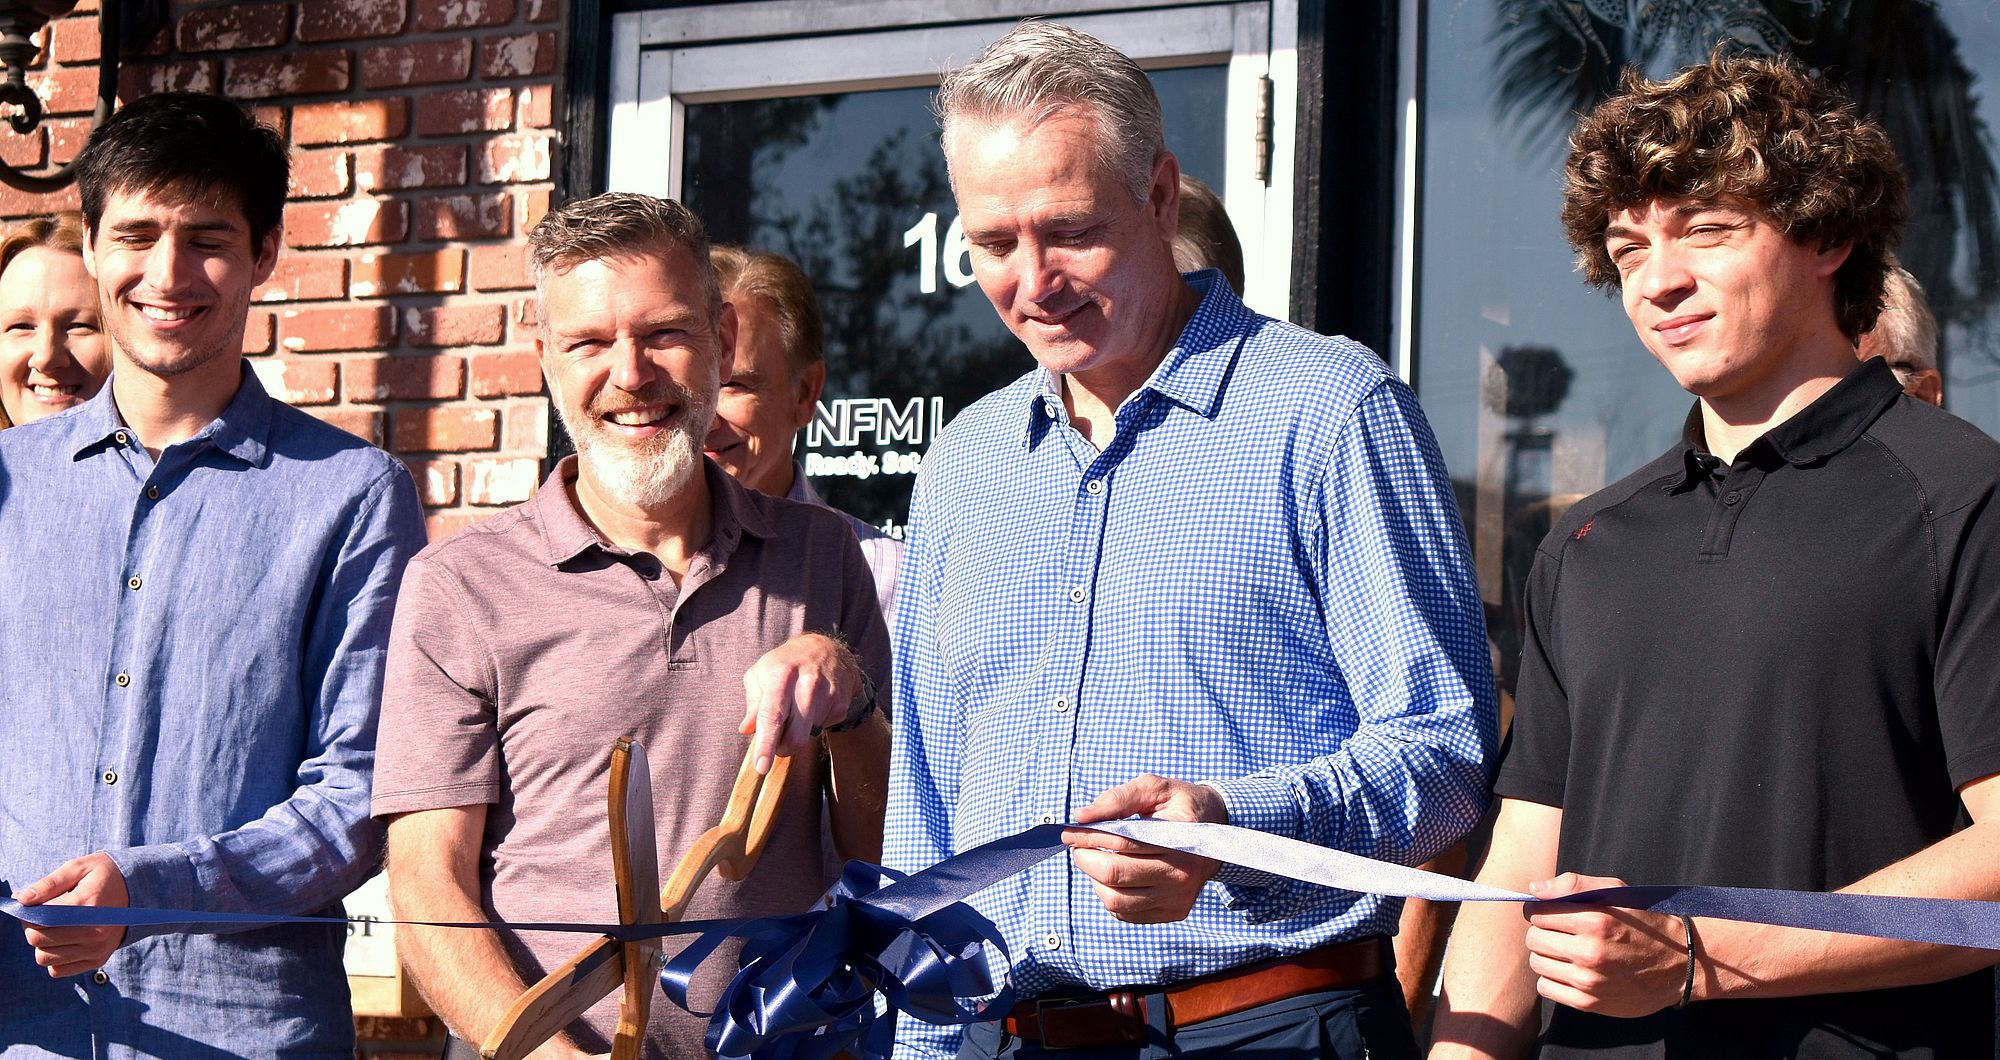 DeSoto Chamber hosts ribbon cutting for NFM Lending